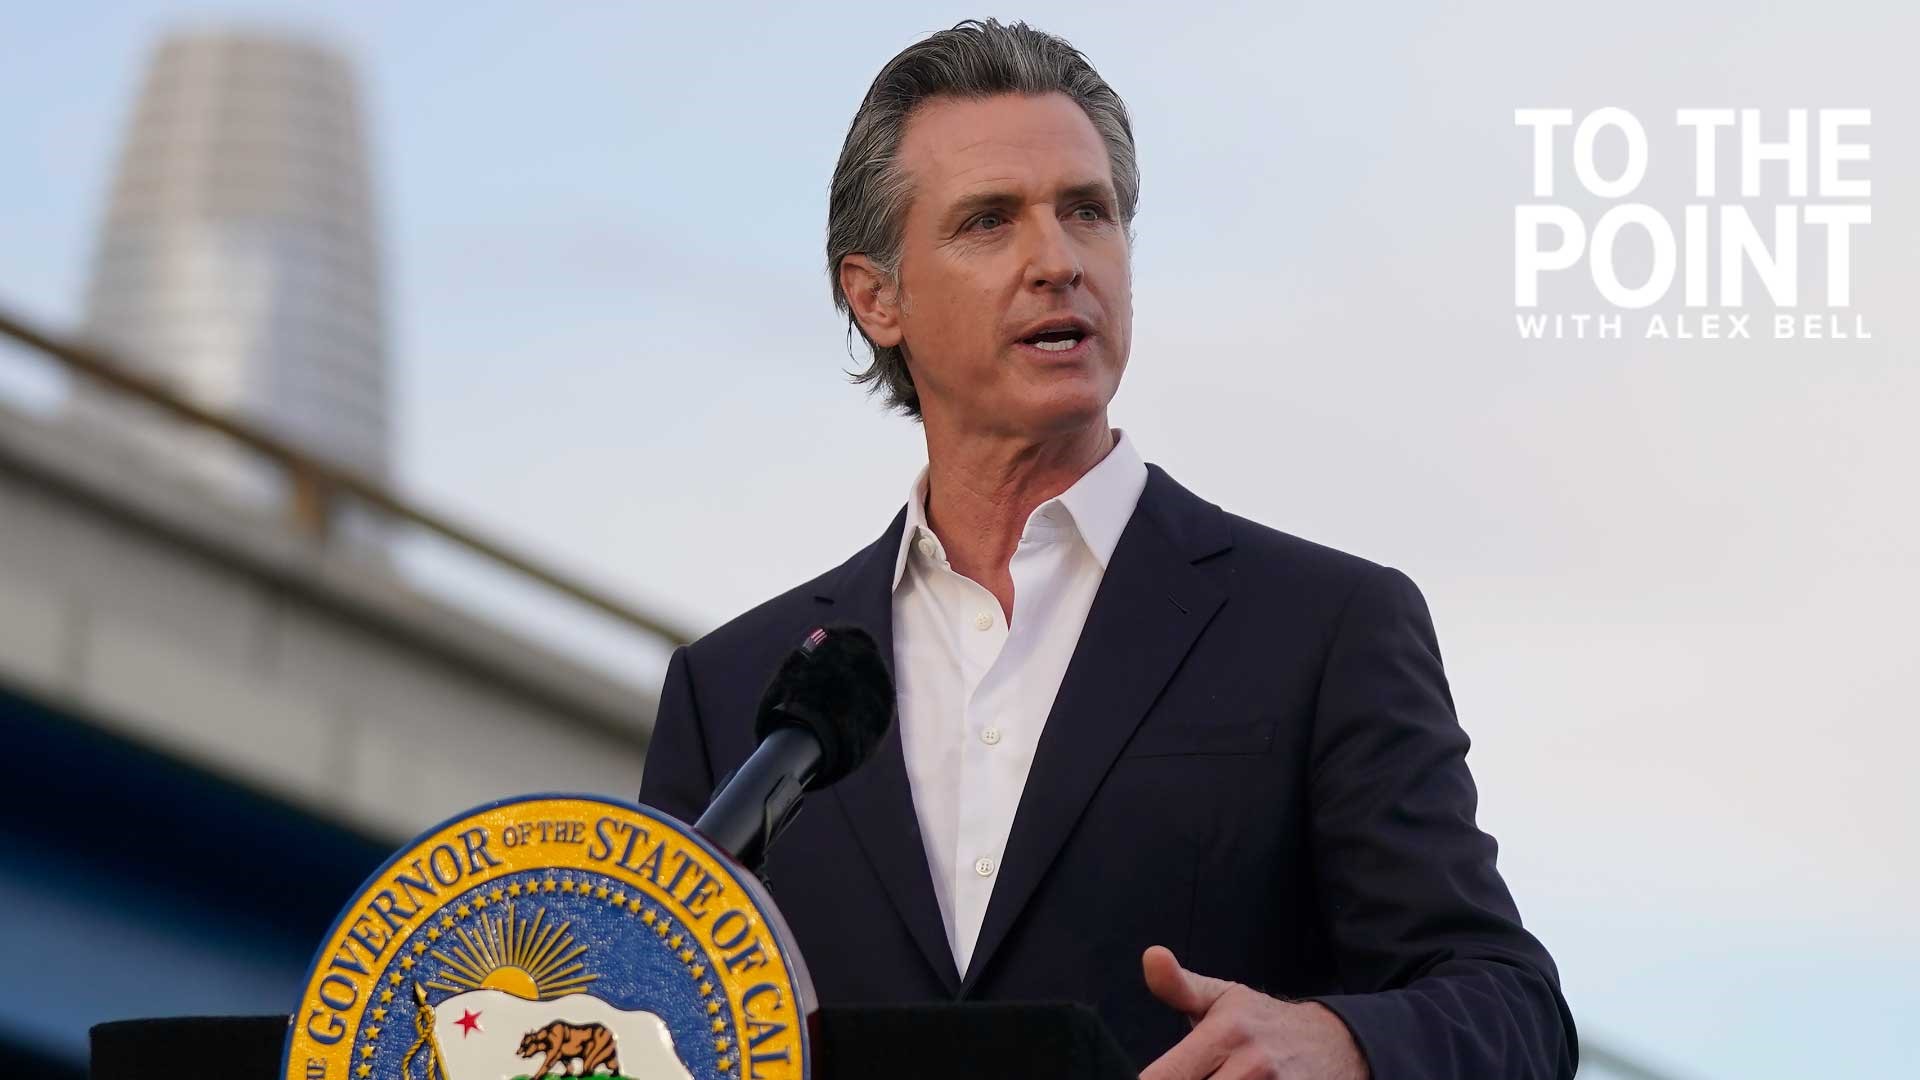 Gavin Newsom faces another recall attempt